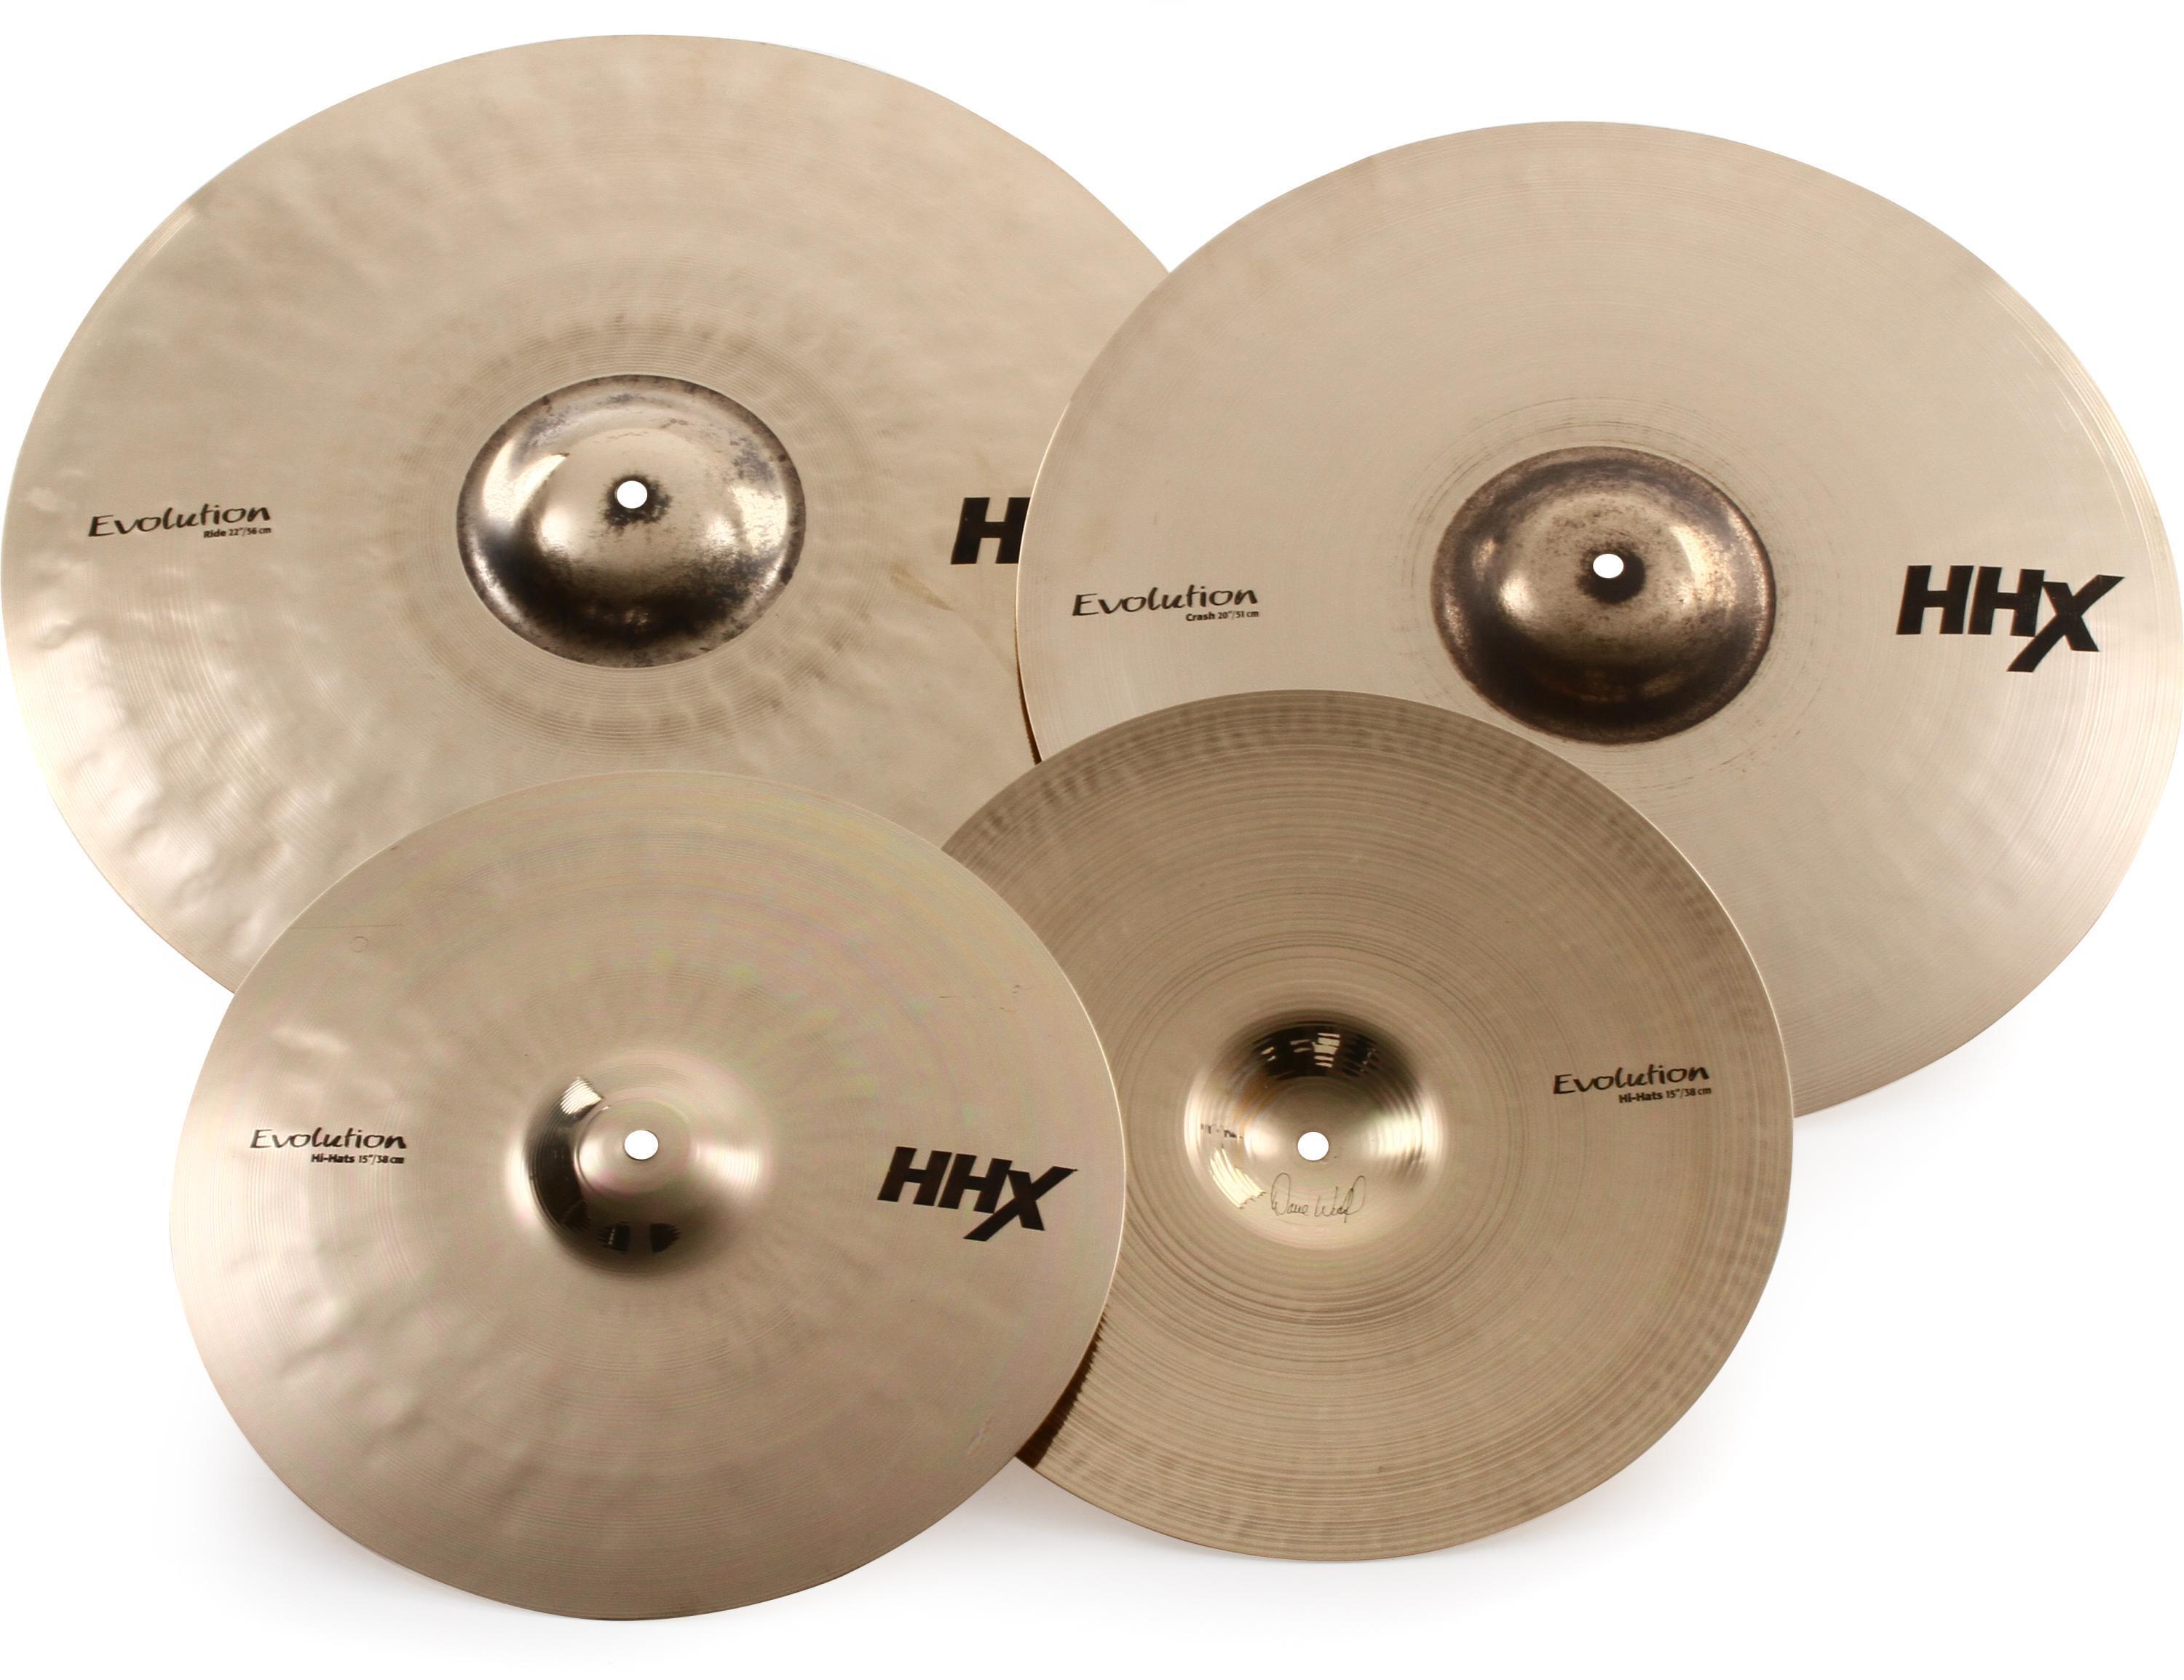 Sabian HHX Evolution Cymbal Set - 15/20/22 inch | Sweetwater